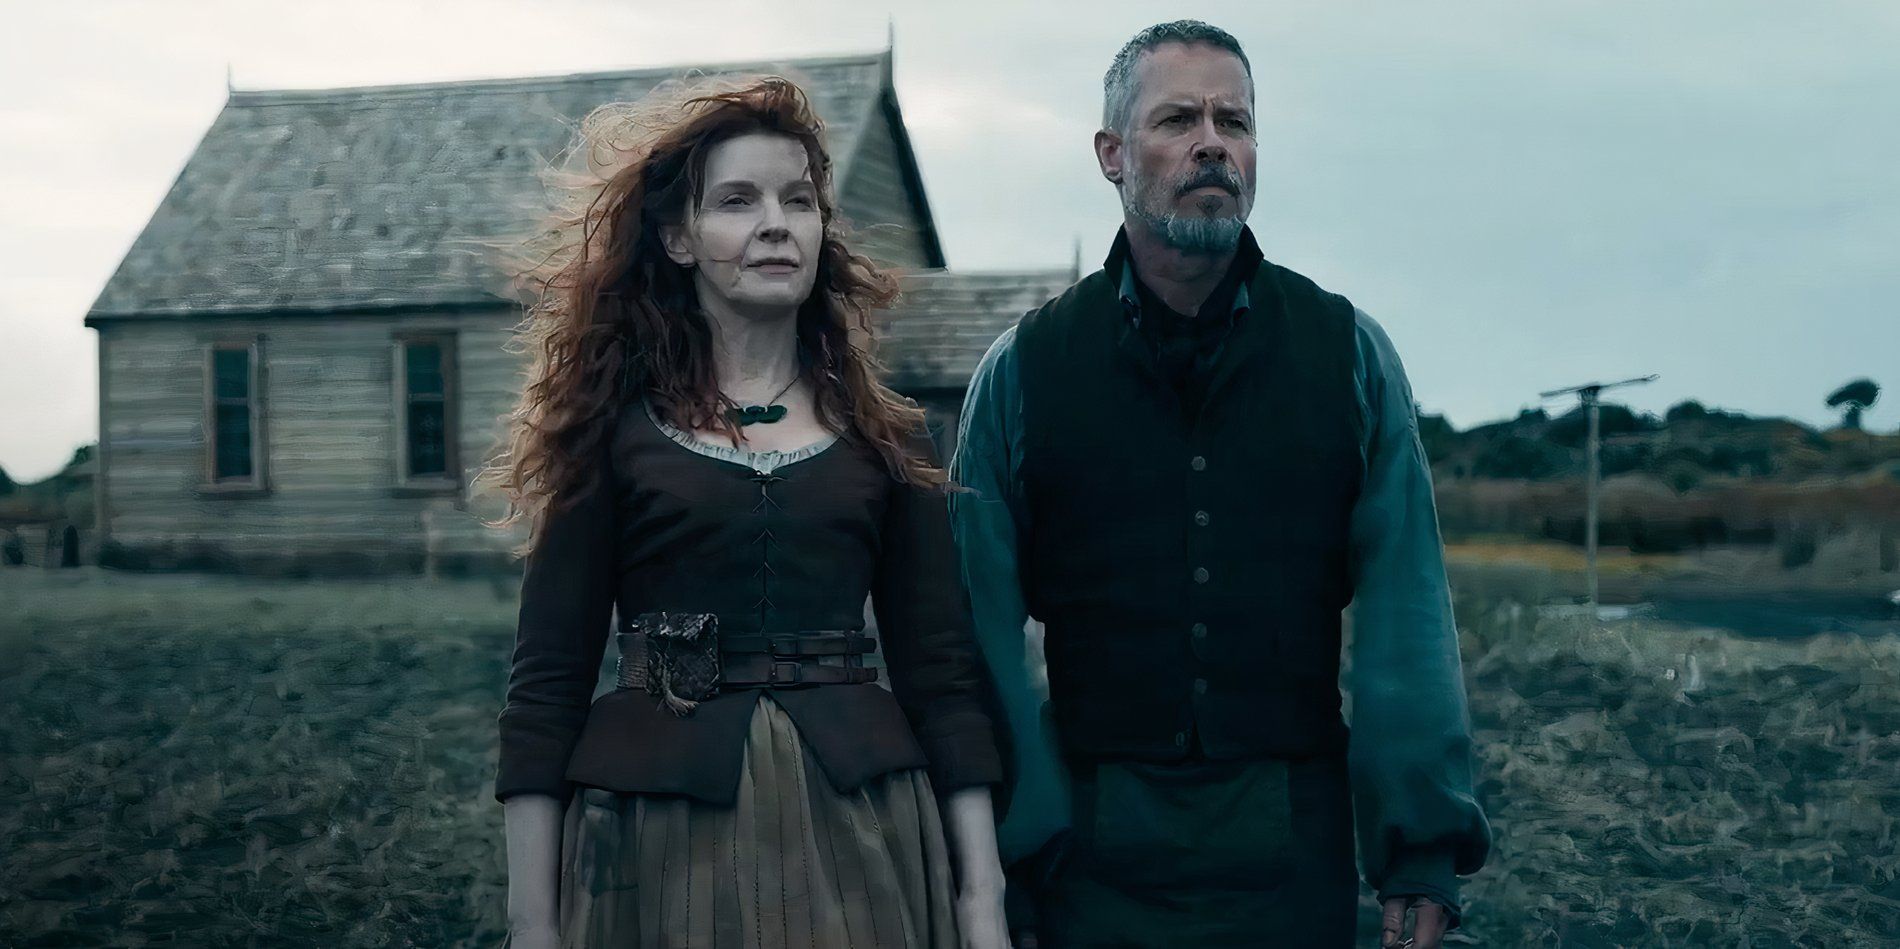 Jacqueline McKenzie as Charlotte and Guy Pearce as Father Munro look into the distance in front of a rural house in The Convert